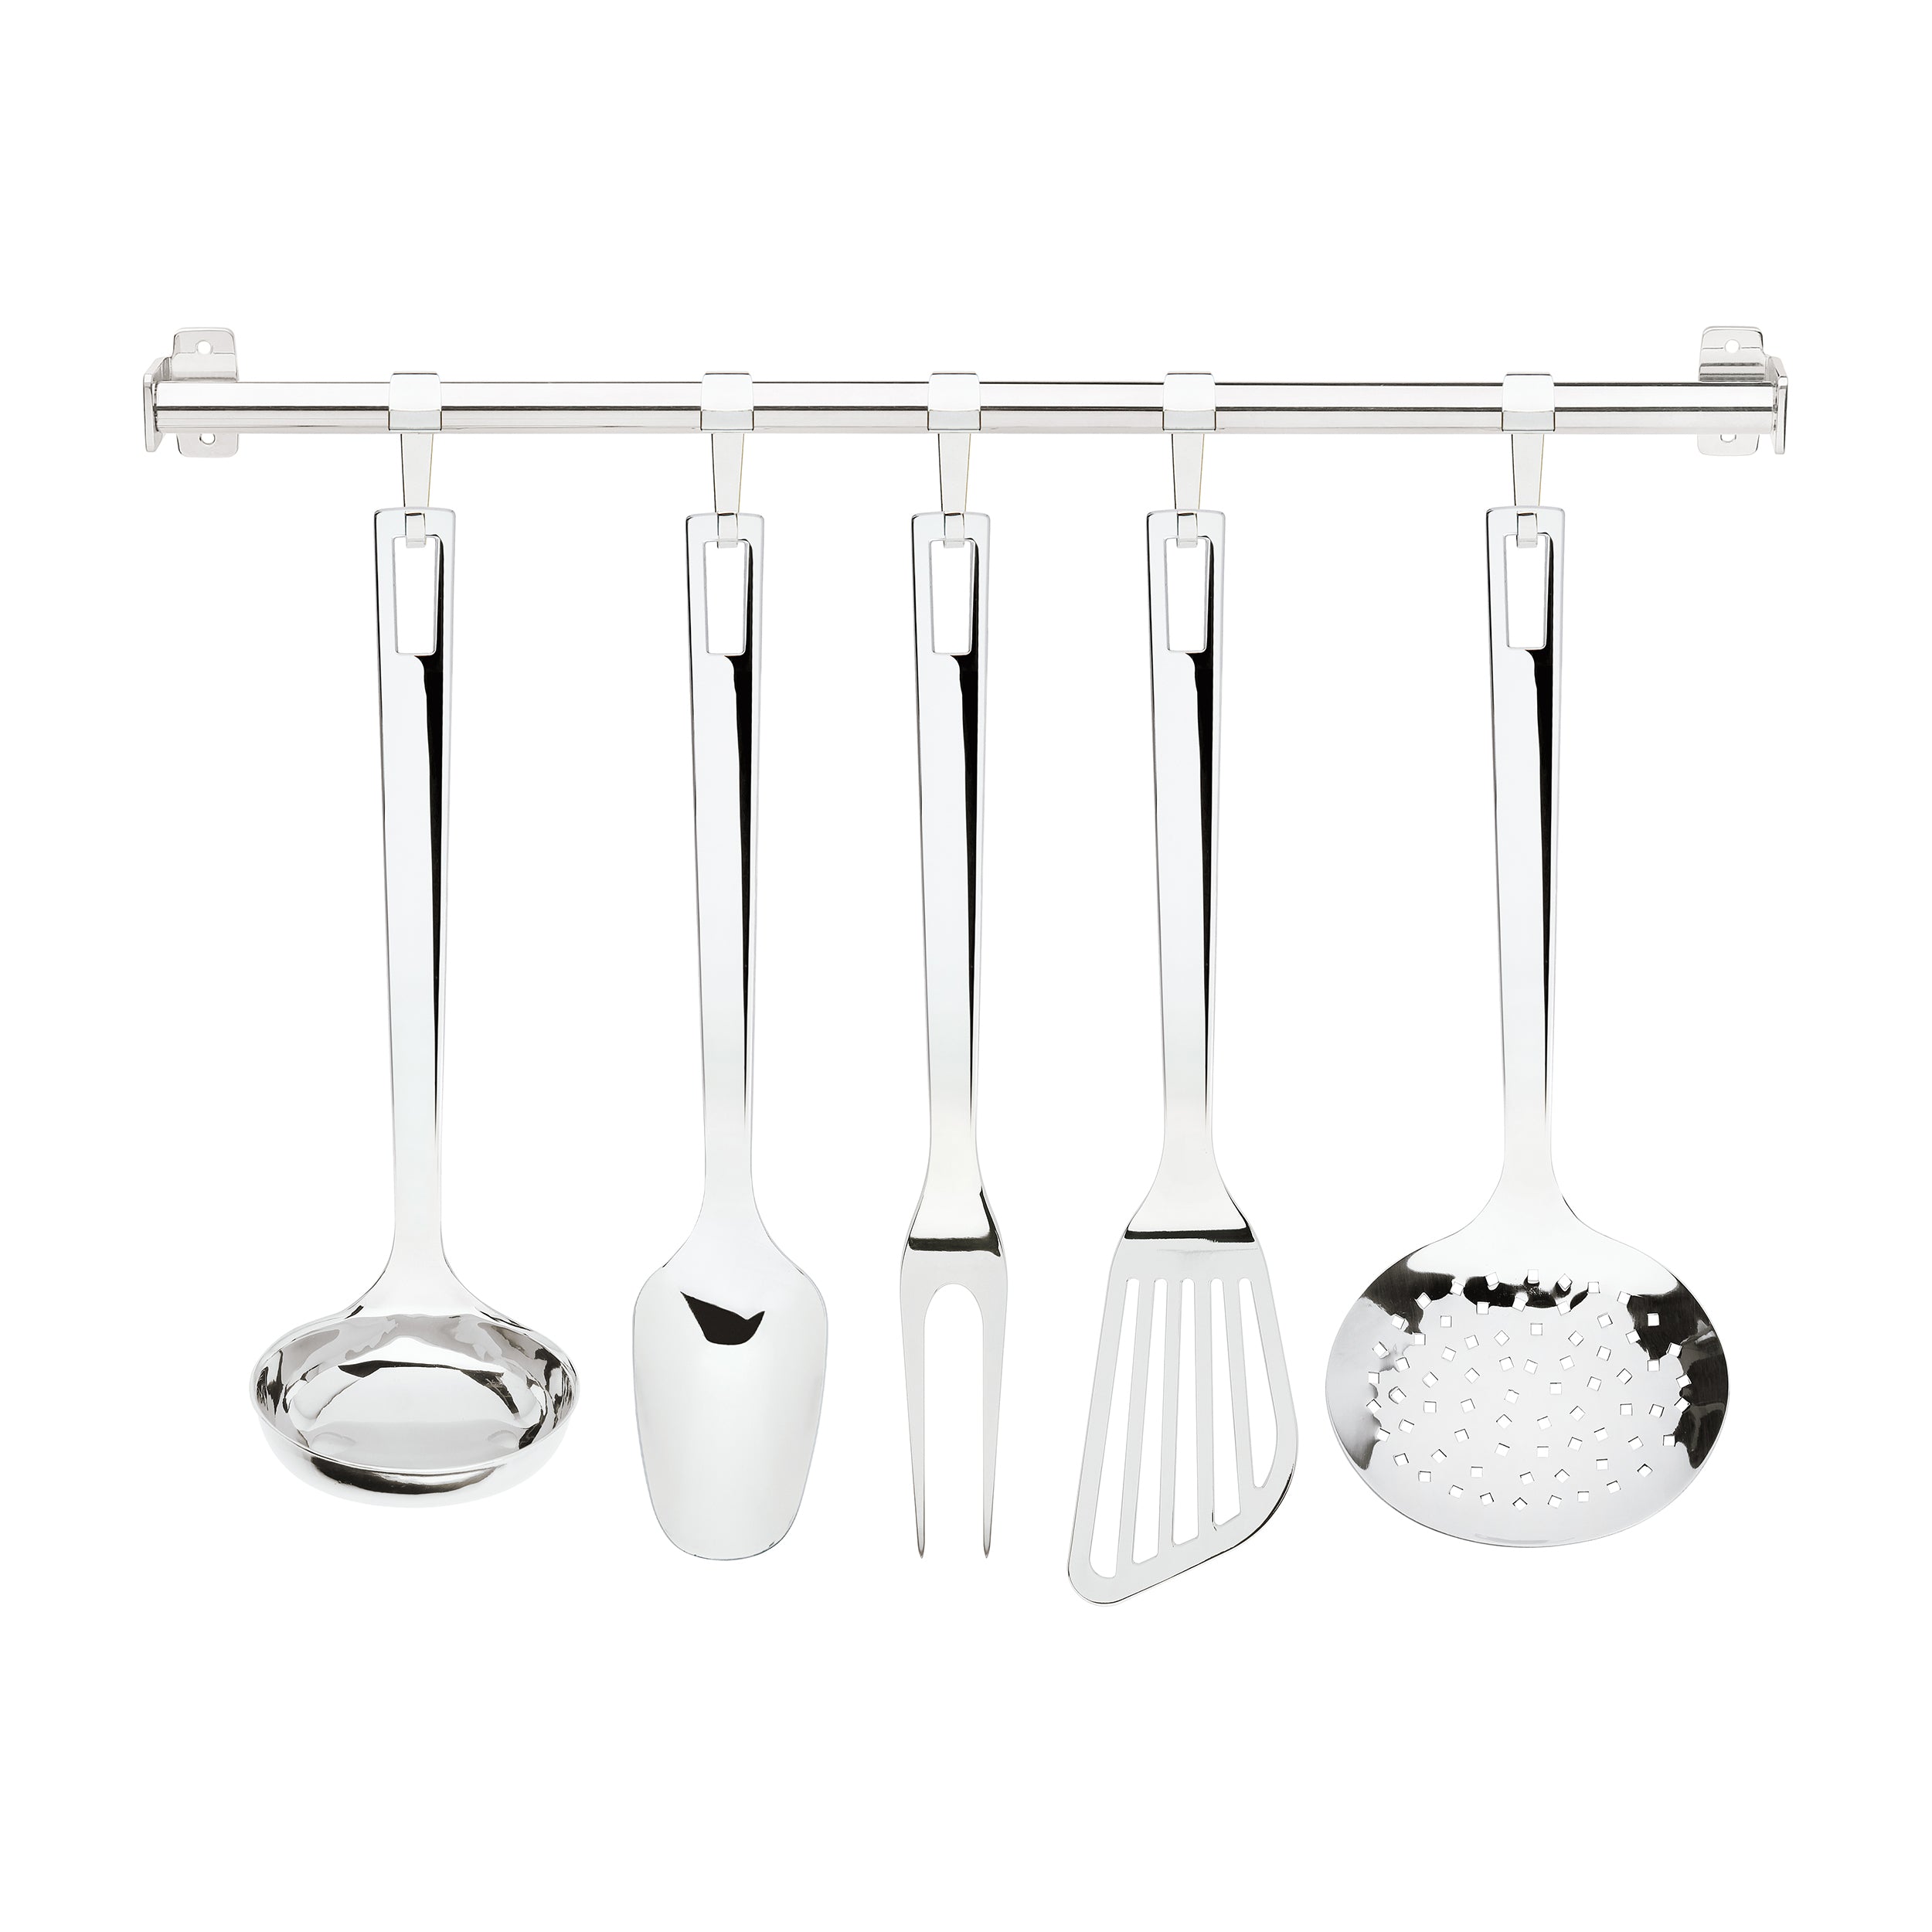 Giannini Factotum Set 6 pieces with hanging bar 18/10 stainless steel